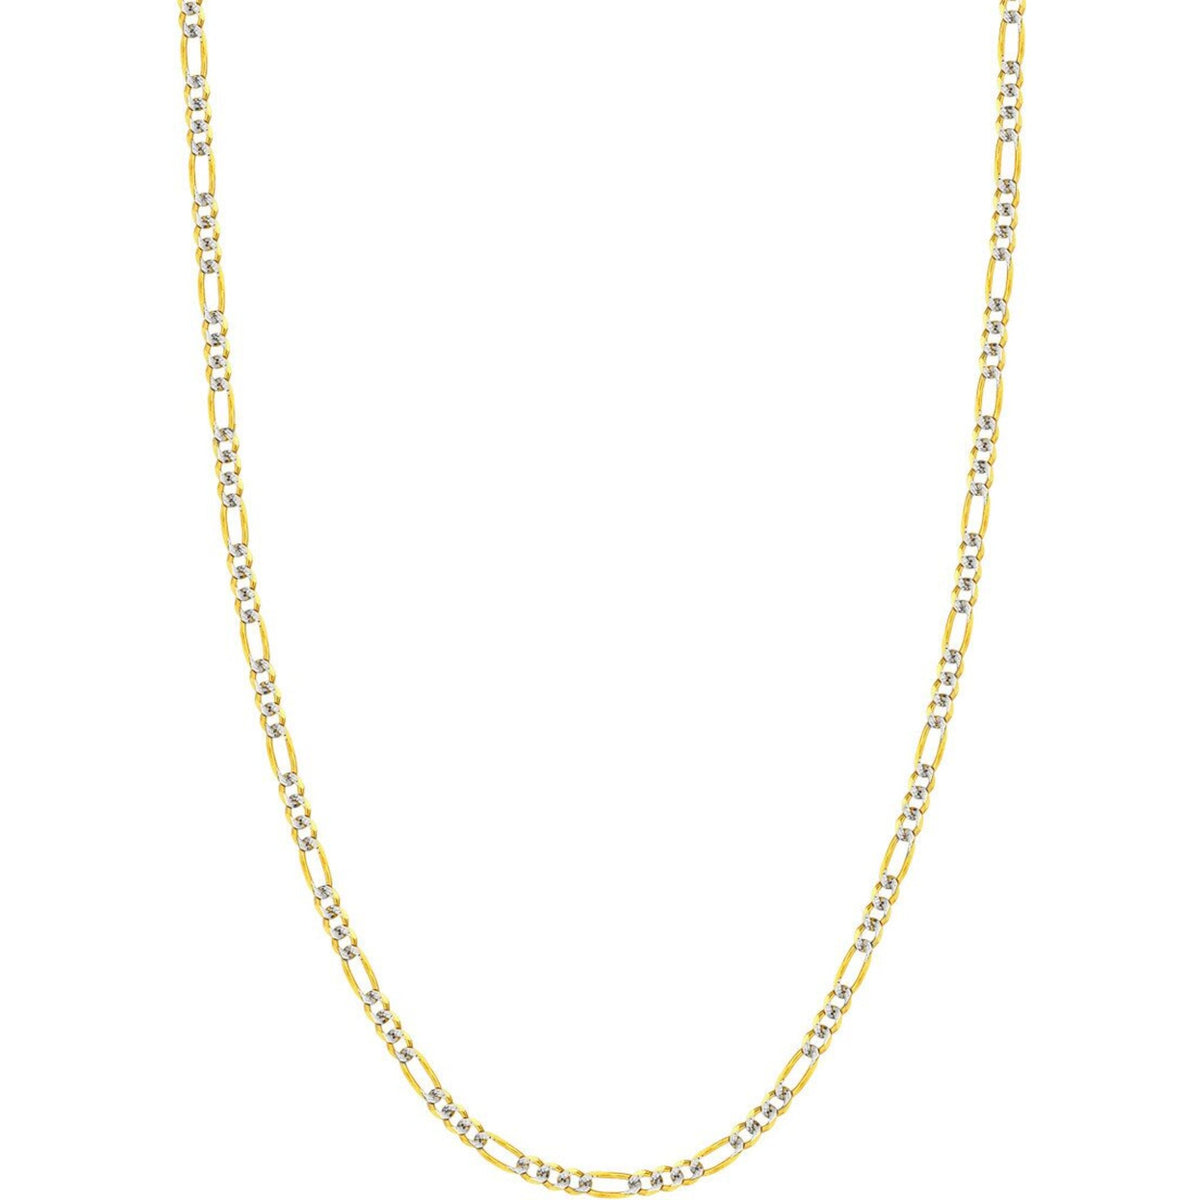 Olas d'Oro 22" Necklace - 14K Yellow/White Gold 3.9mm Two-Tone Pave Figaro Chain with Lobster Lock